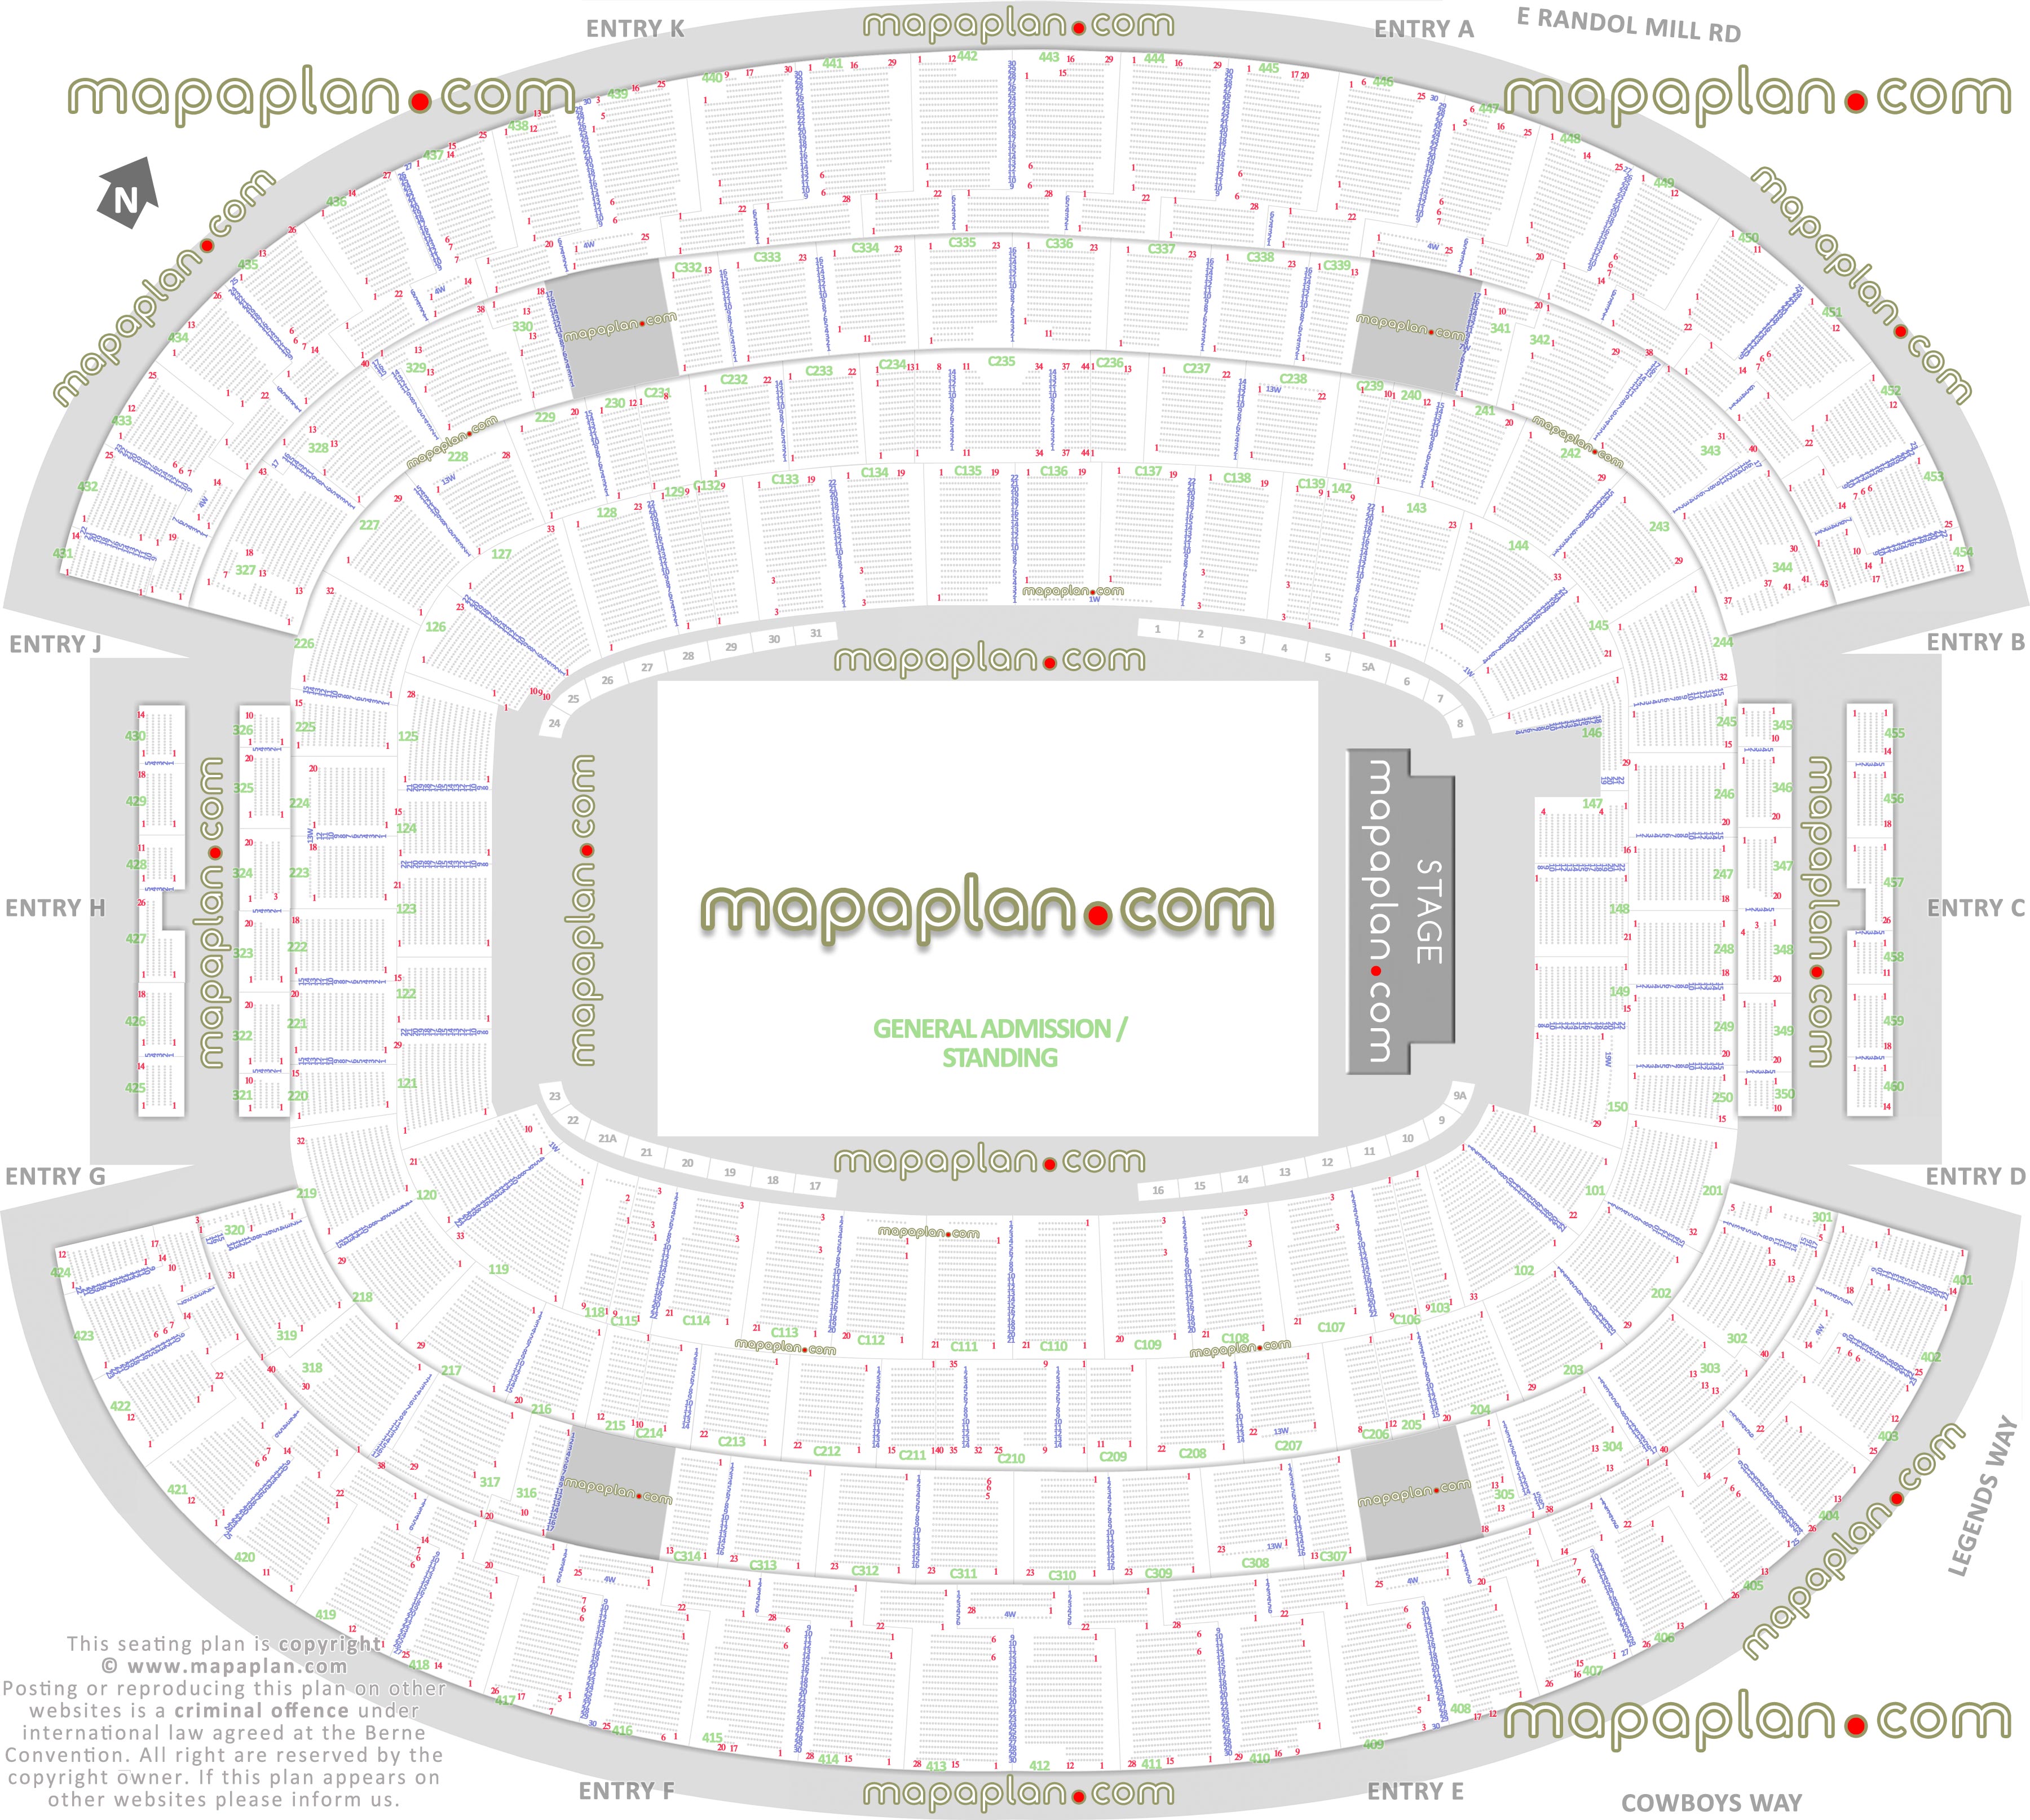 general admission ga floor standing concert capacity 3d plan att center stadium arlington tx concert stage detailed floor pit plan sections best seat numbers selection information guide virtual interactive image map rows 1 2 3 4 5 6 7 8 9 10 11 12 13 14 15 16 17 18 19 20 21 22 23 24 25 26 27 28 29 30 Dallas Cowboys AT&T Stadium seating chart